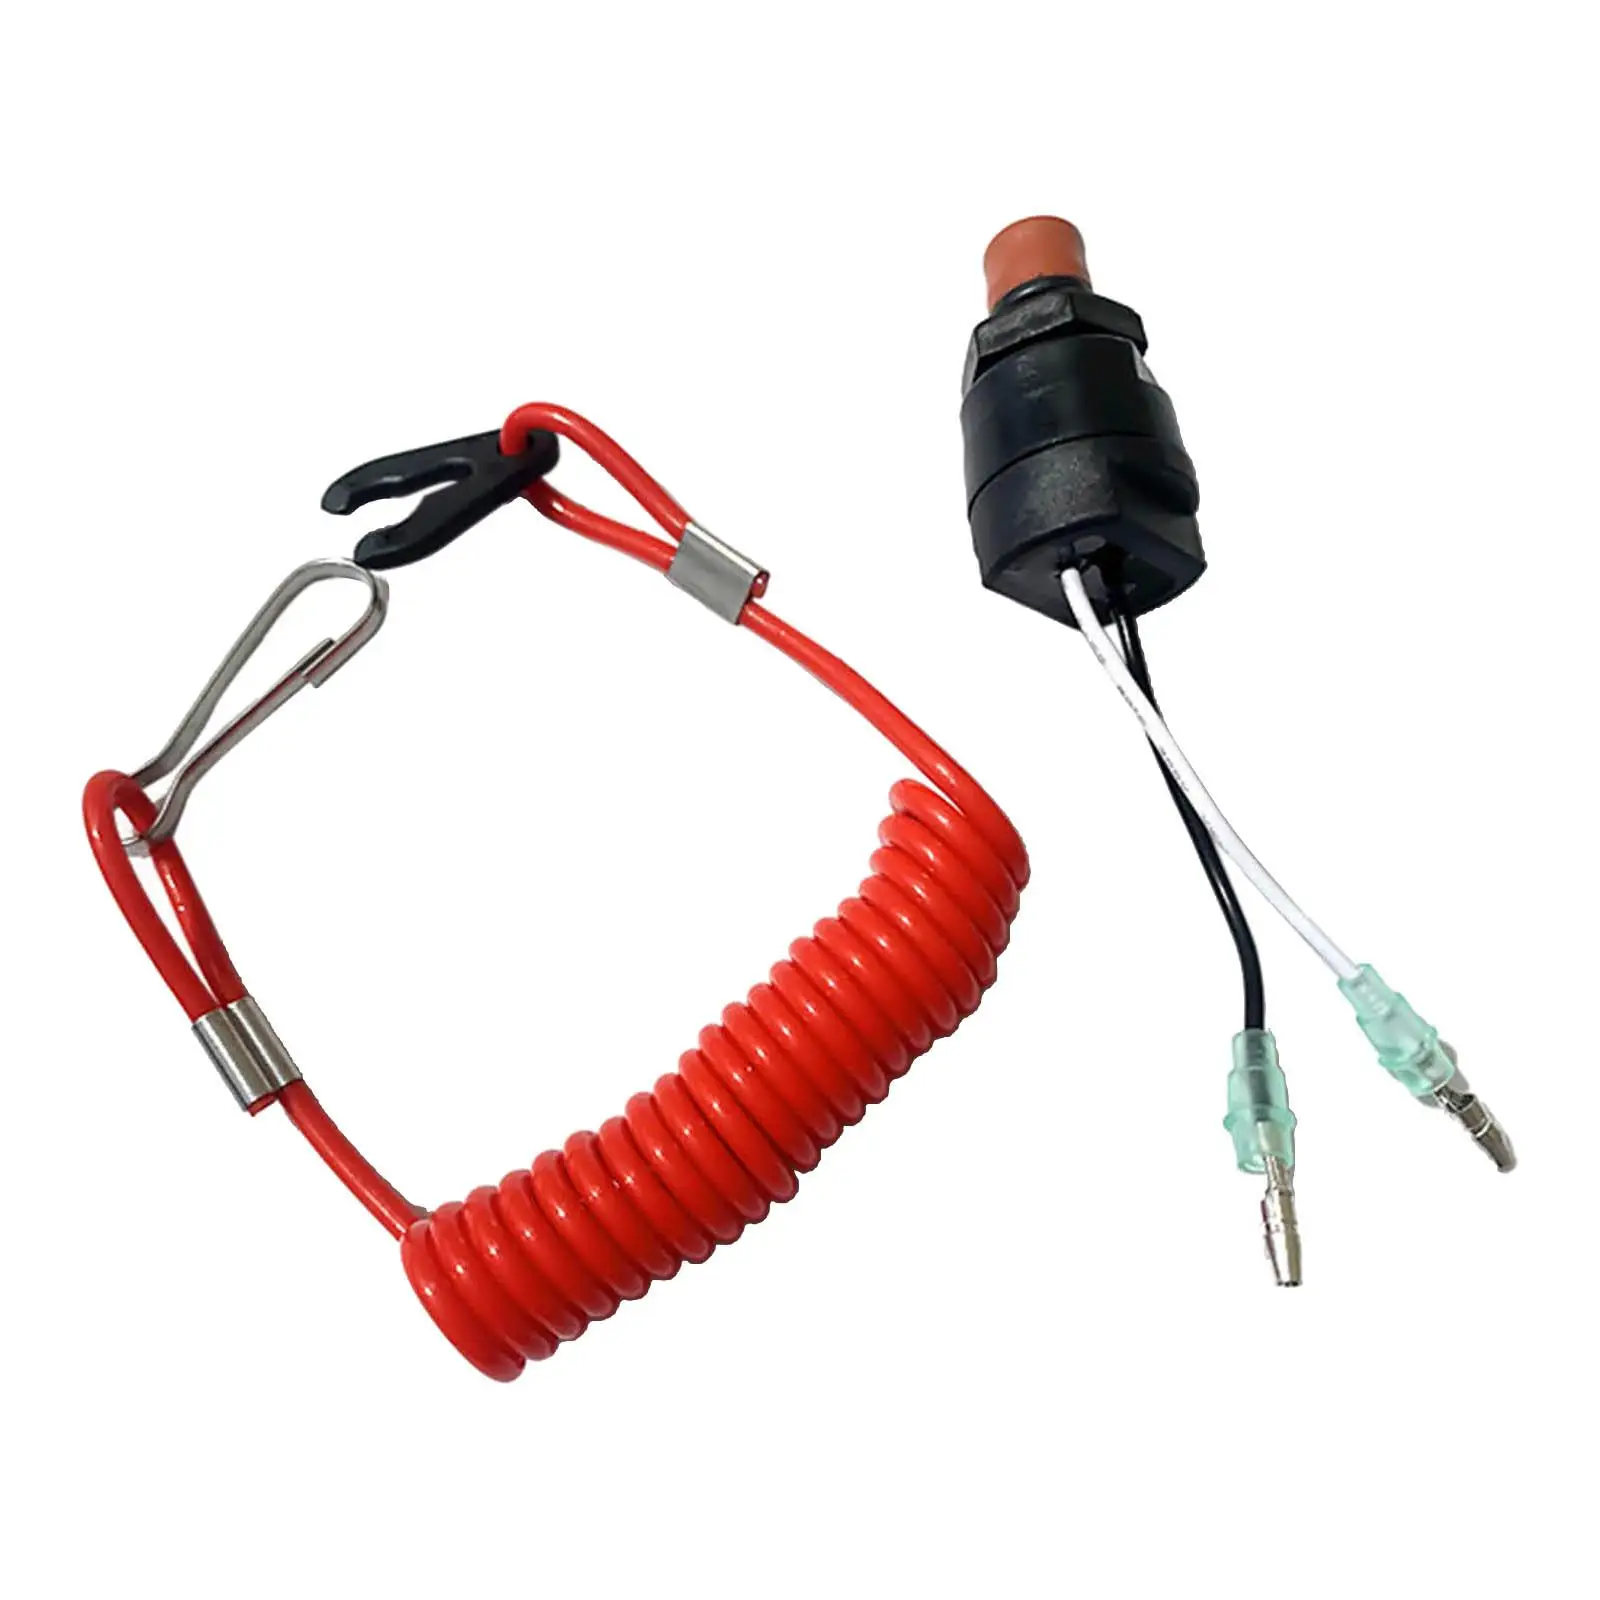 Boat Motor Emergency Kill Switch W/ Tether Cord Fit for Honda Spring Cord